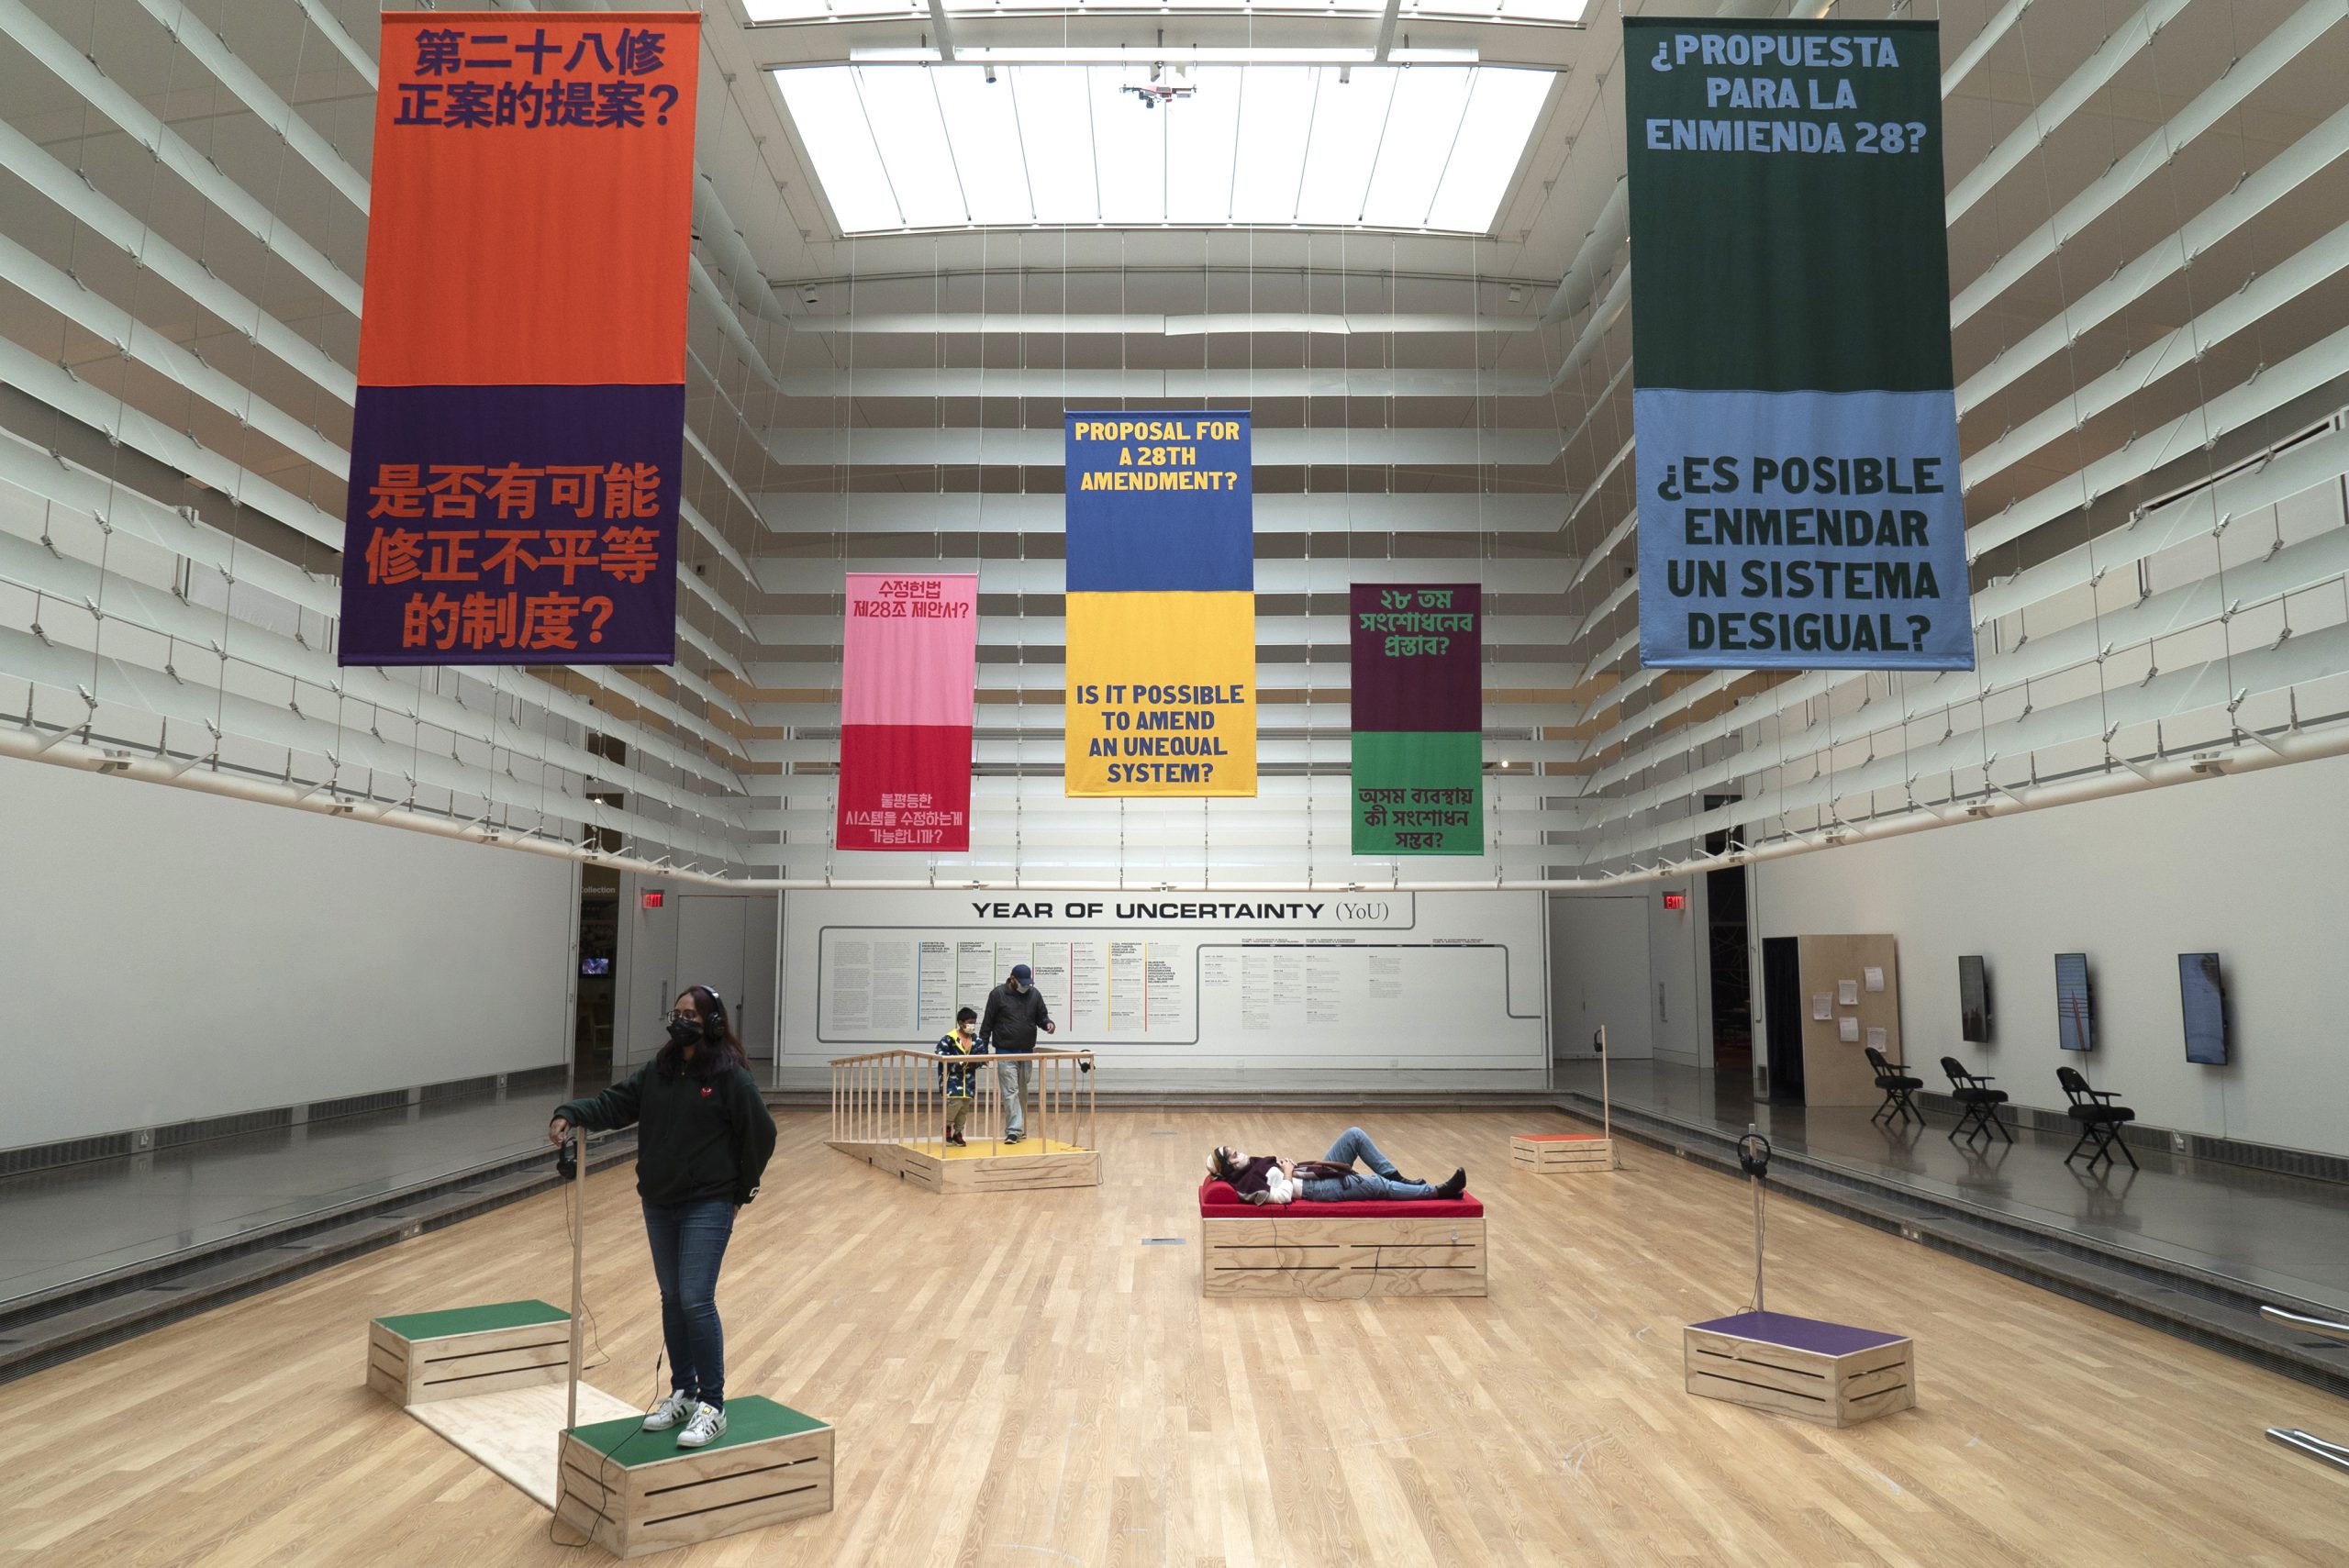 Five colorful banners hang from the ceiling reading Proposal for a 28th Amendment?” And “Is it possible to amend an unequal system? in the five most spoken languages in Corona, NY. Below the banners, four visitors stand and lay on the five wooden colorful soapboxes in different arrangements.